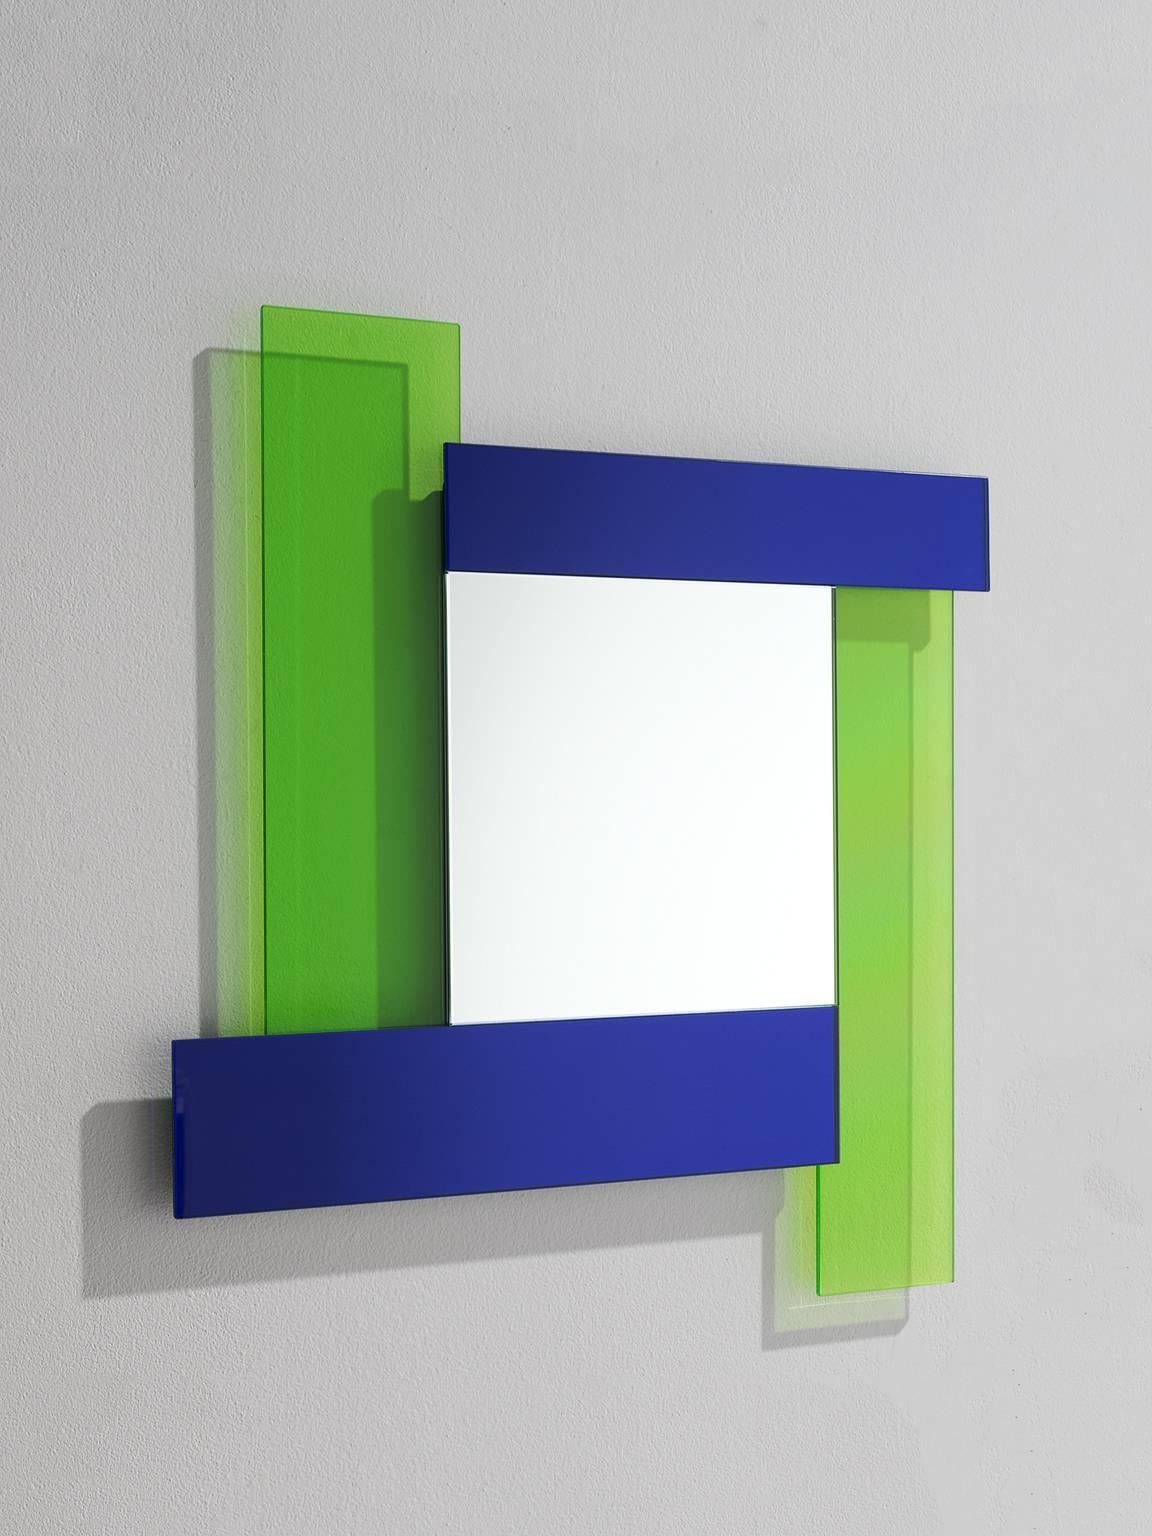 Ettore Sottsass for glass, mirror, glass, Italy, design 1970s, production later.

Ettore Sottass designed this wall mirror in the age in which bold colours and shapes where common sense. The mirror consits of various shapes and sizes and is executed